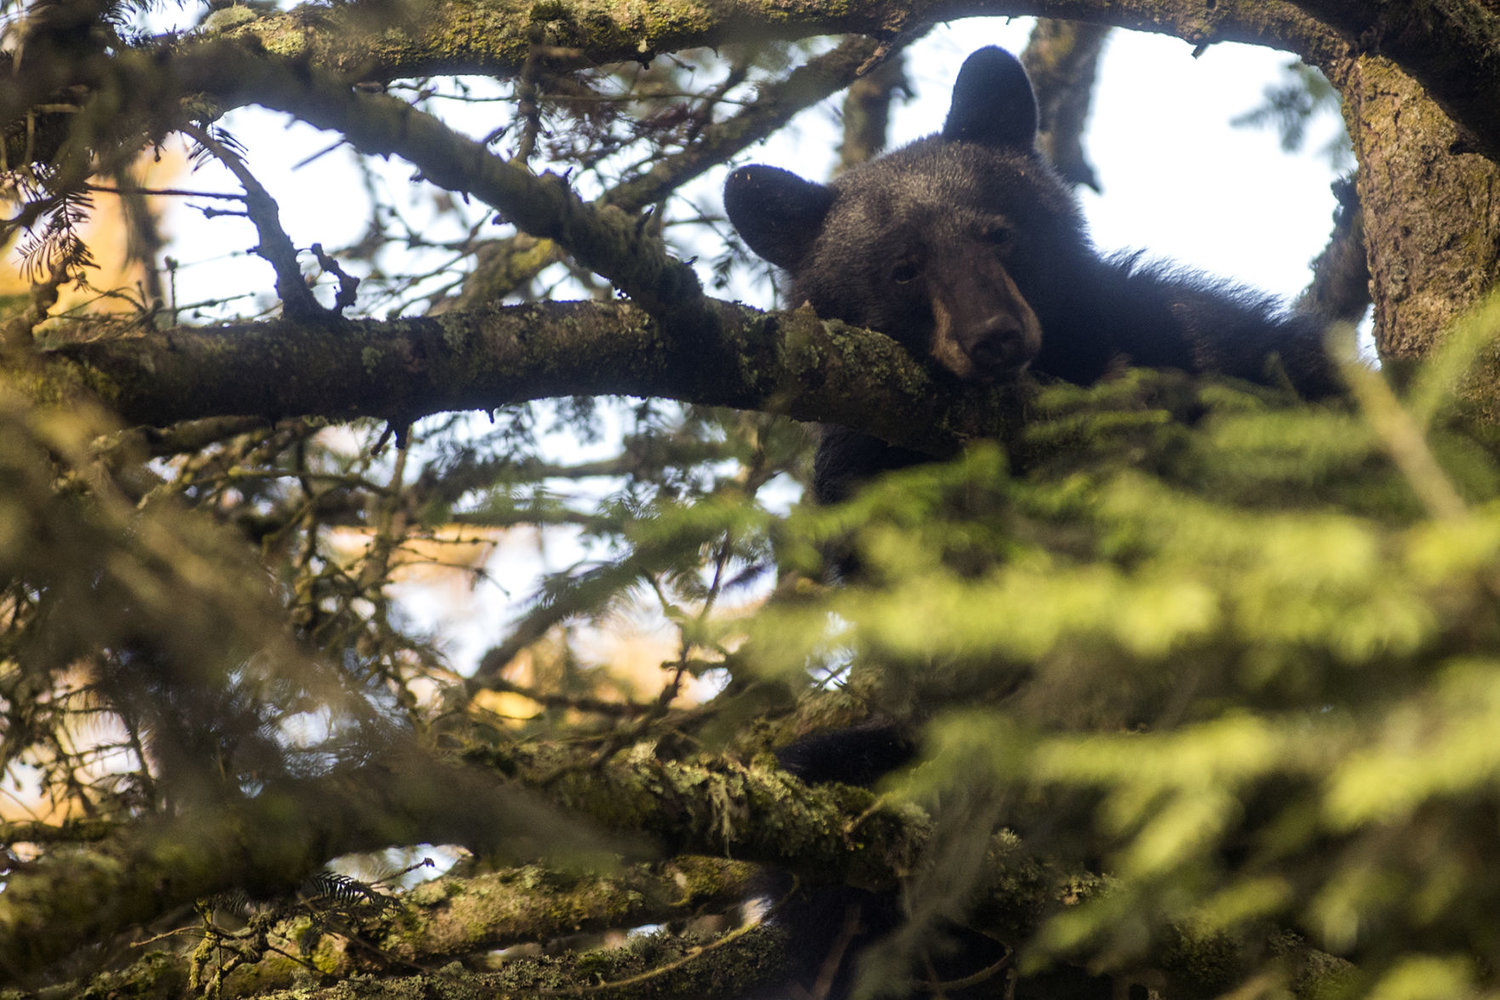 FILE PHOTO — A black bear sits up in a tree in the backyard of a home on the 300 block of West Chestnut Street in Centralia on Thursday, Oct. 8, 2015.